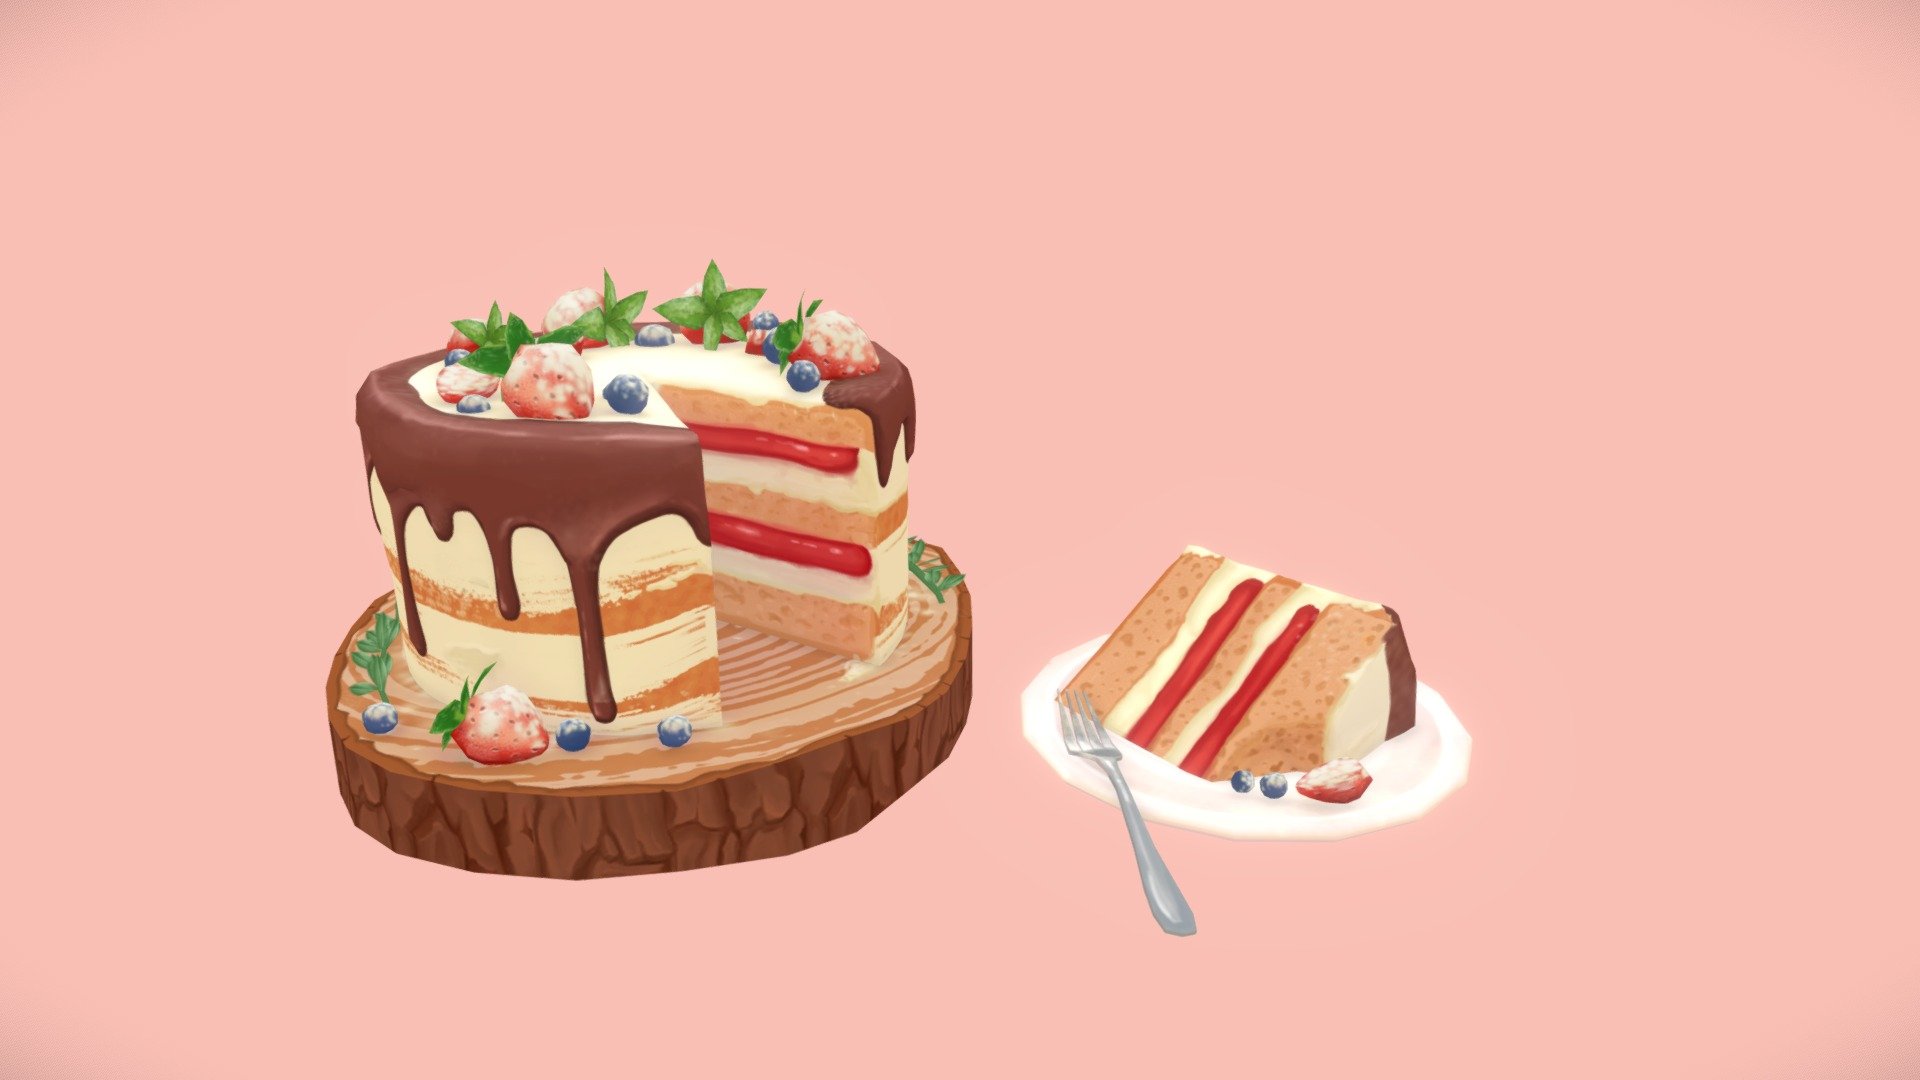 My entry to the Low Poly Dessert Challenge. Didn't finish it in time but I'm posting it and will finish it after. 
Largely based off of my wedding cake 3d model